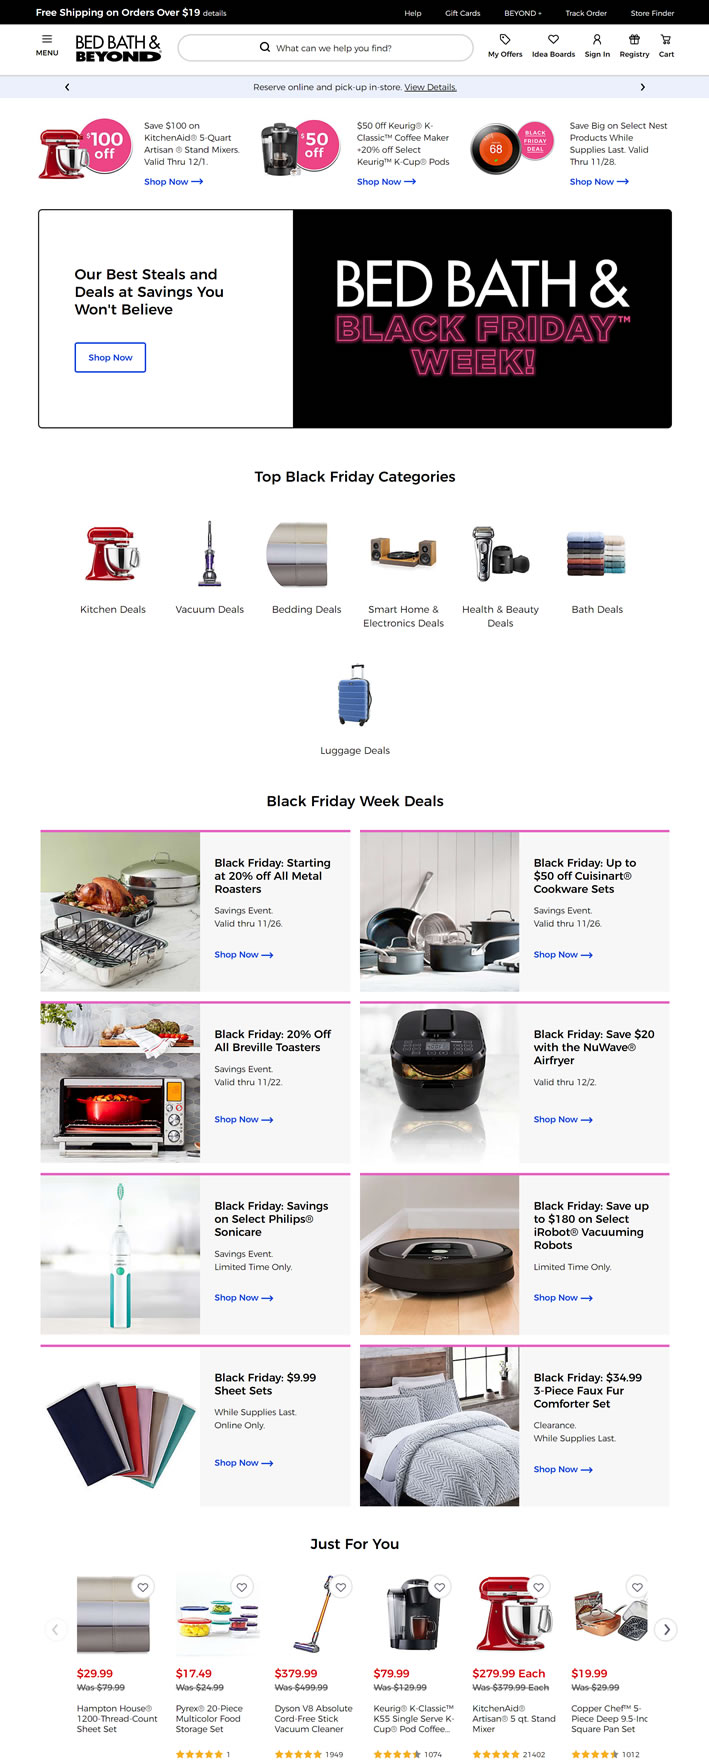 American Famous Household Goods Shopping Website: Bed Bath & Beyond